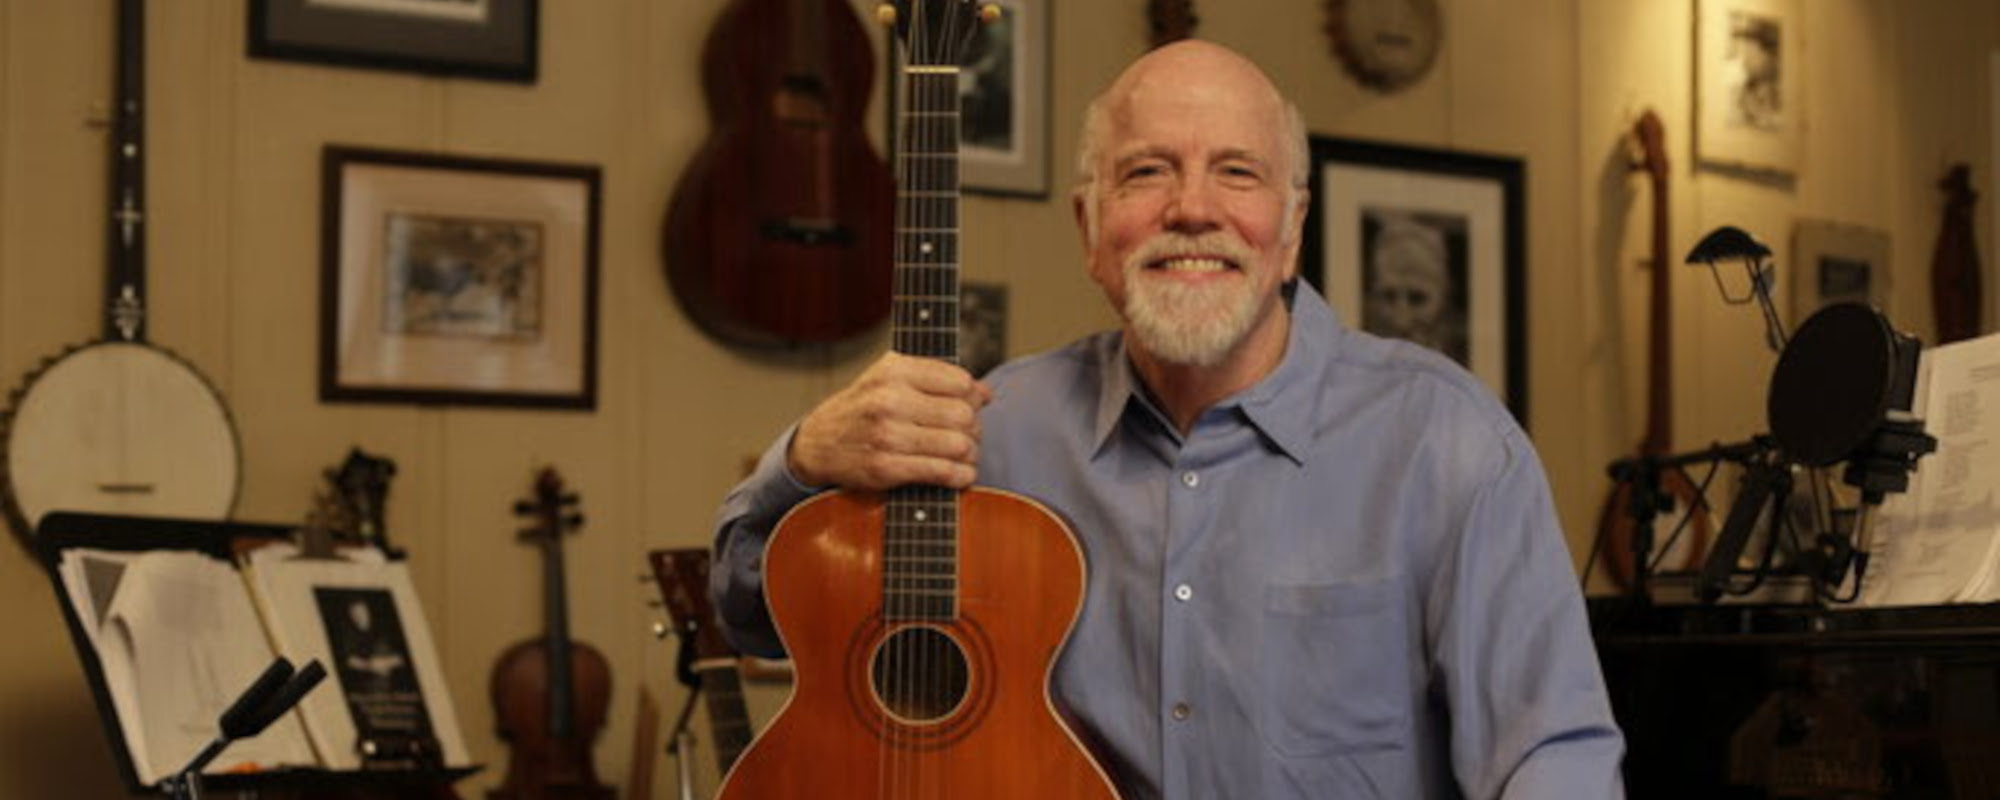 Review: John McCutcheon Shares Songs of the Heart